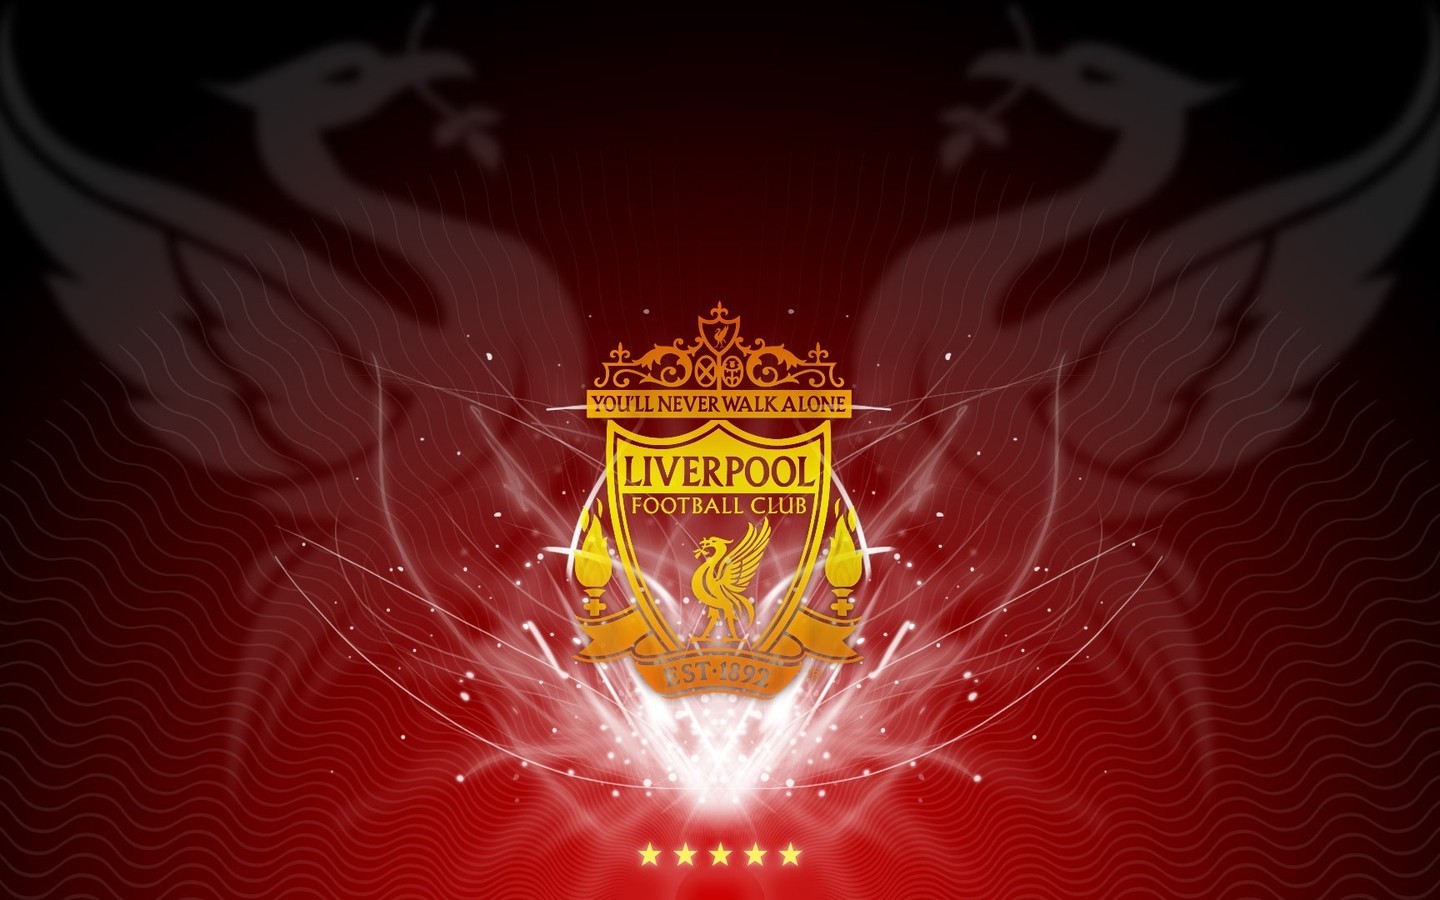 football, liverpool, brands, logos, sports, red 1080p